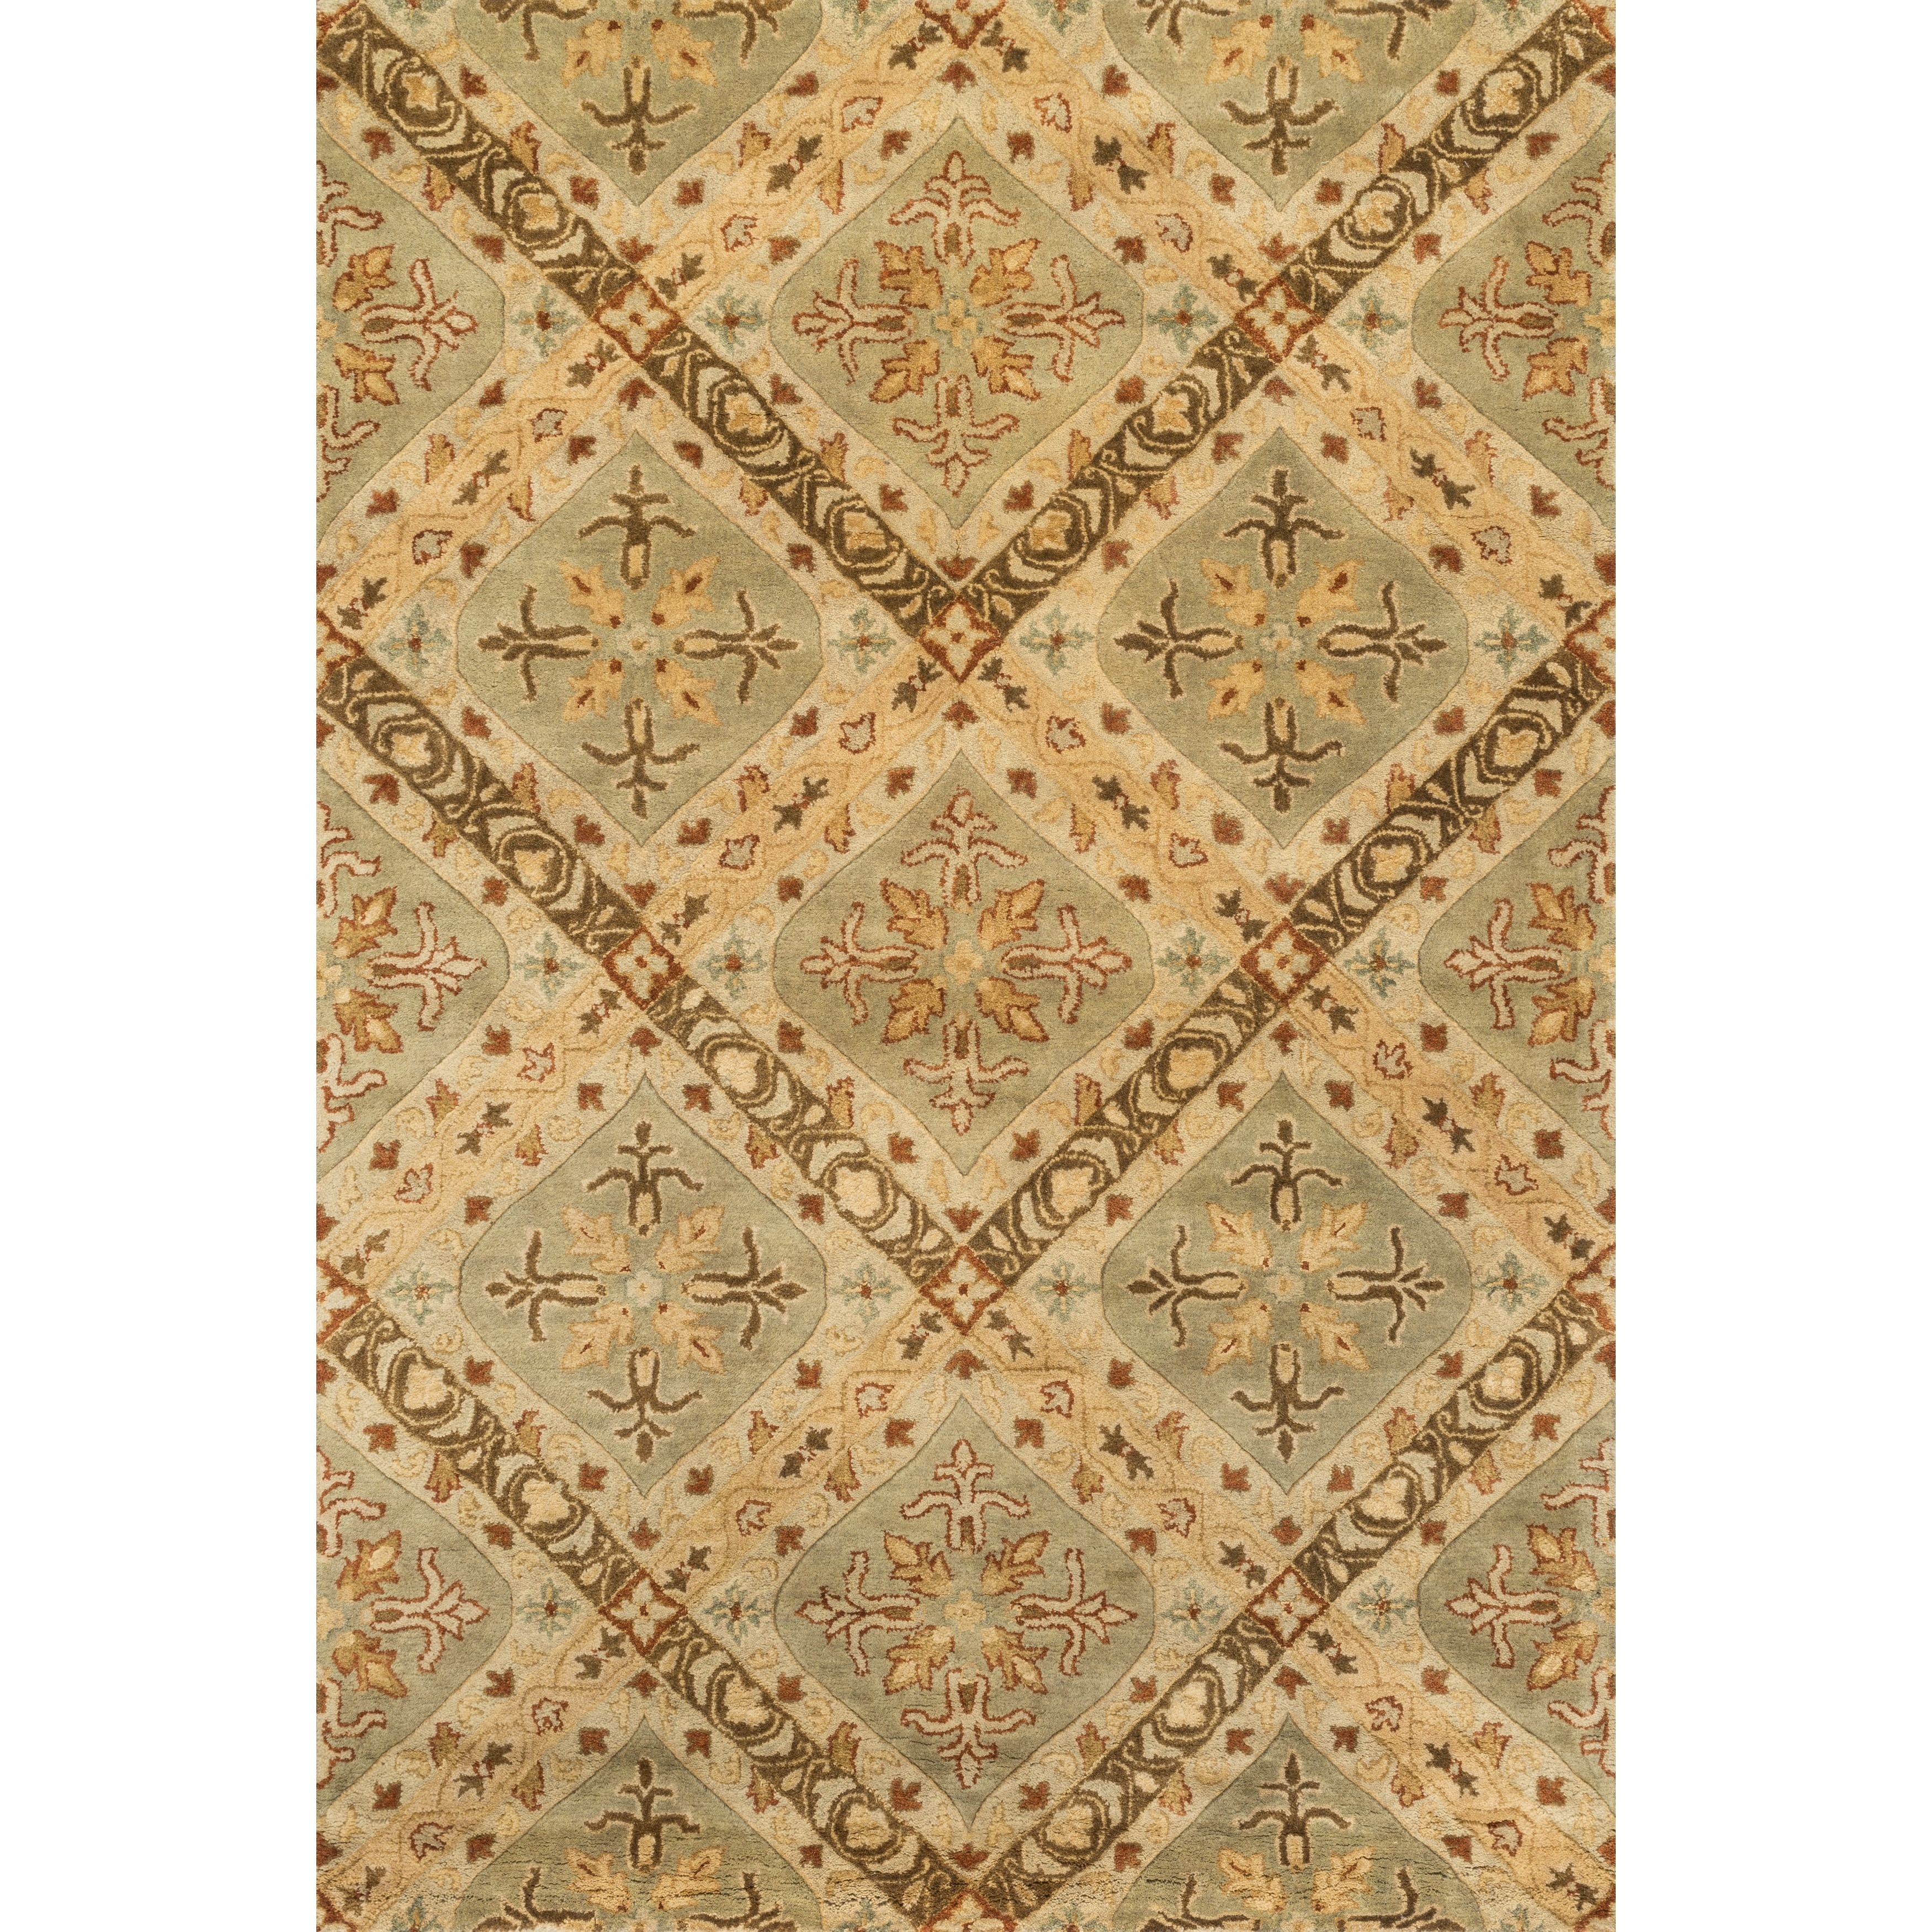 Hand tufted Ferring Sage Wool Rug (36 x 56) Today $184.99